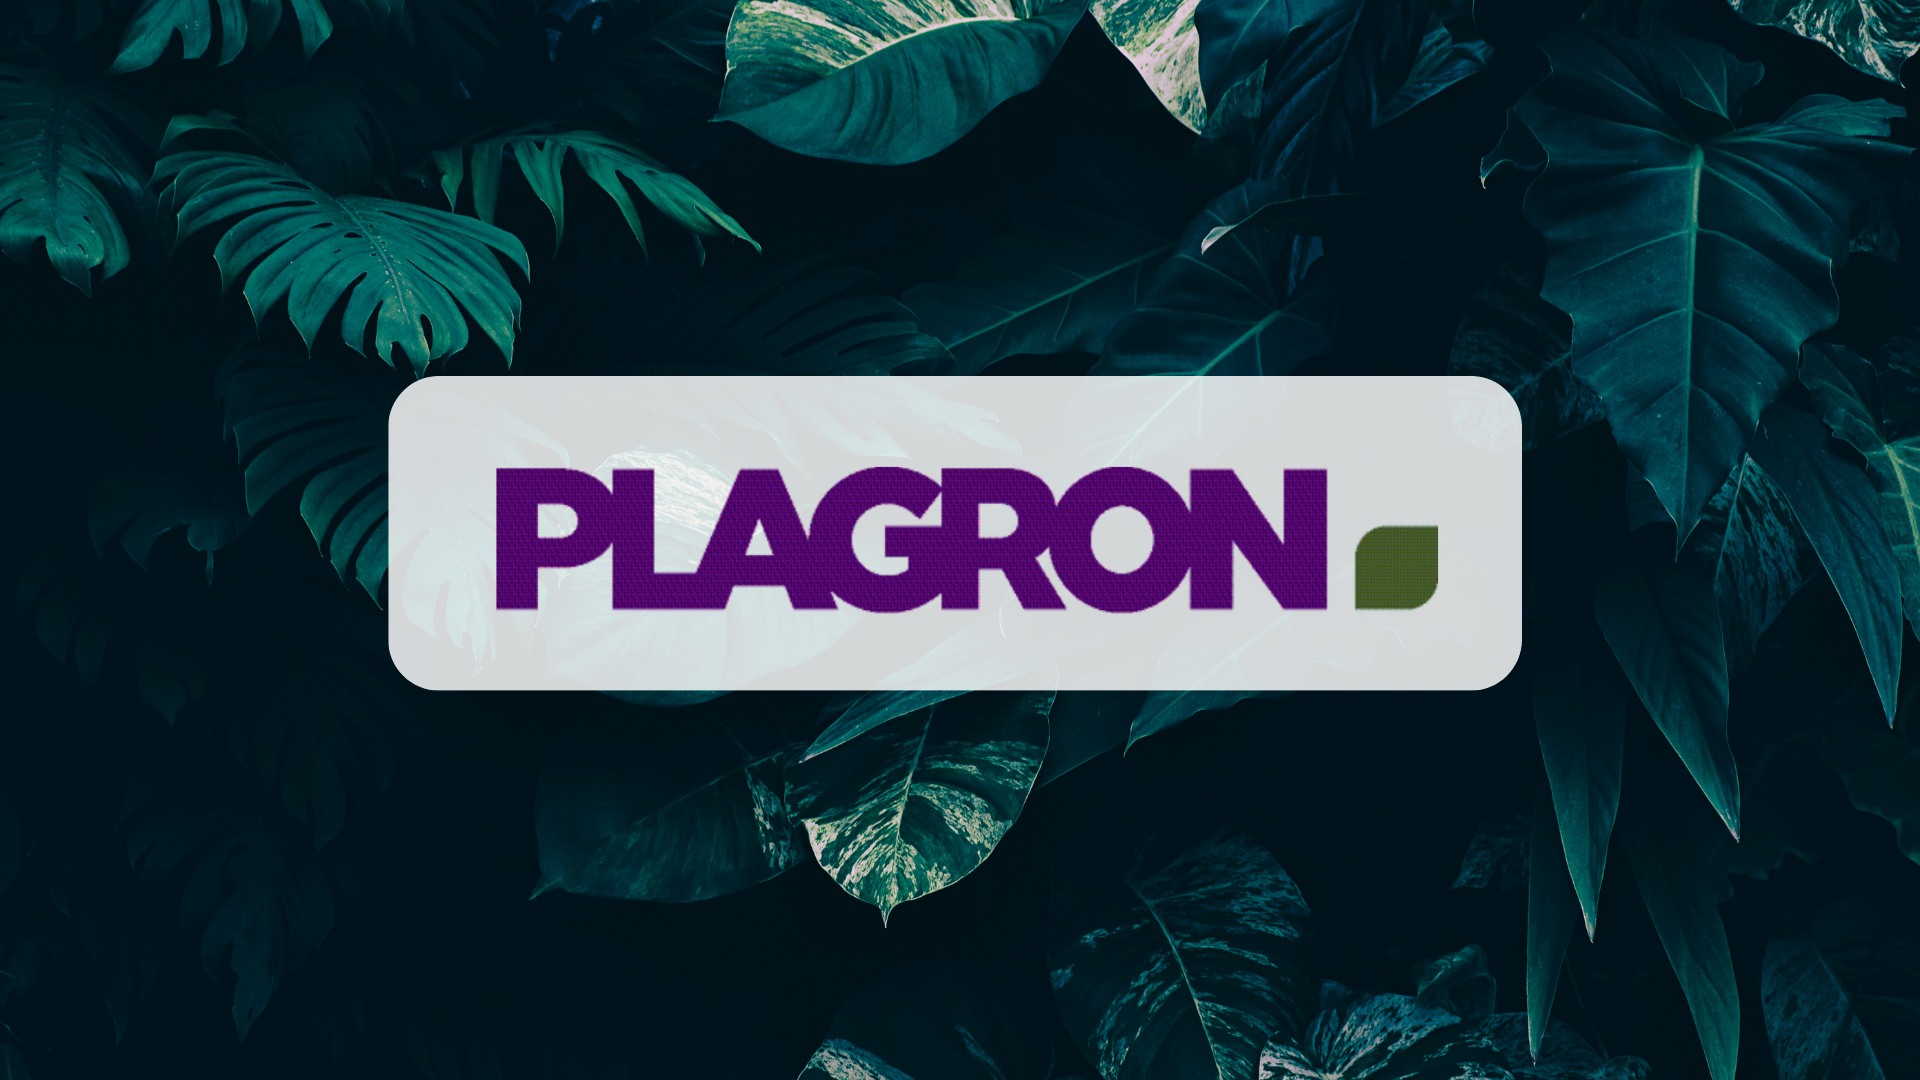 Plagron Nutrient Range: The Complete Guide